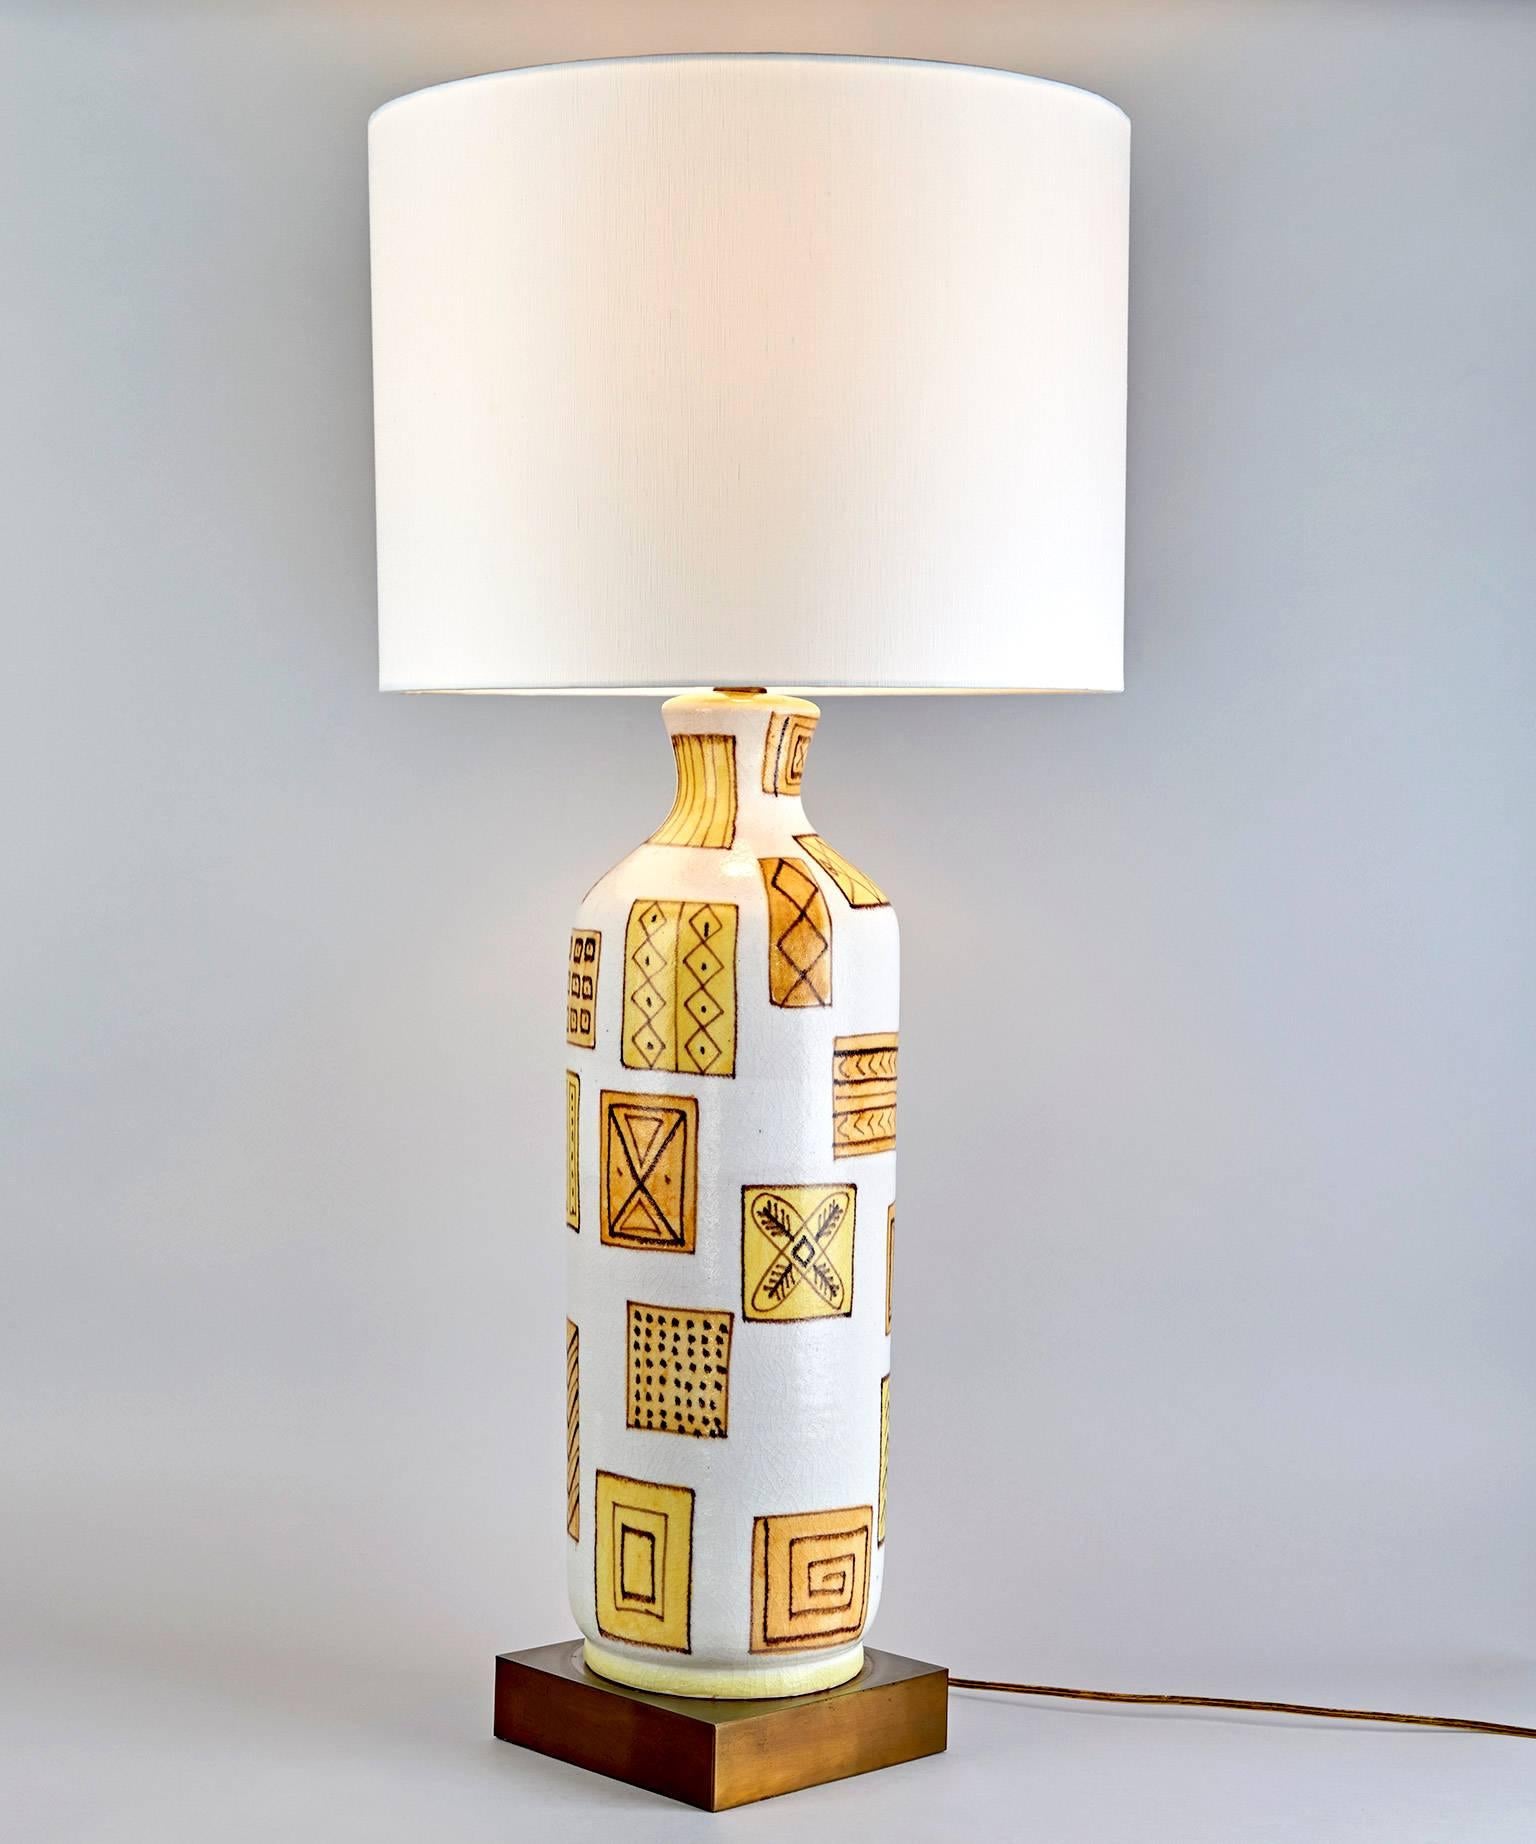 A graphically stunning ceramic table lamp by postwar Italy's greatest ceramist, Guido Gambone. The enigmatic design of intricately but spontaneously decorated squares and rectangles is arrayed over the surface of the ceramic lamp-base with the